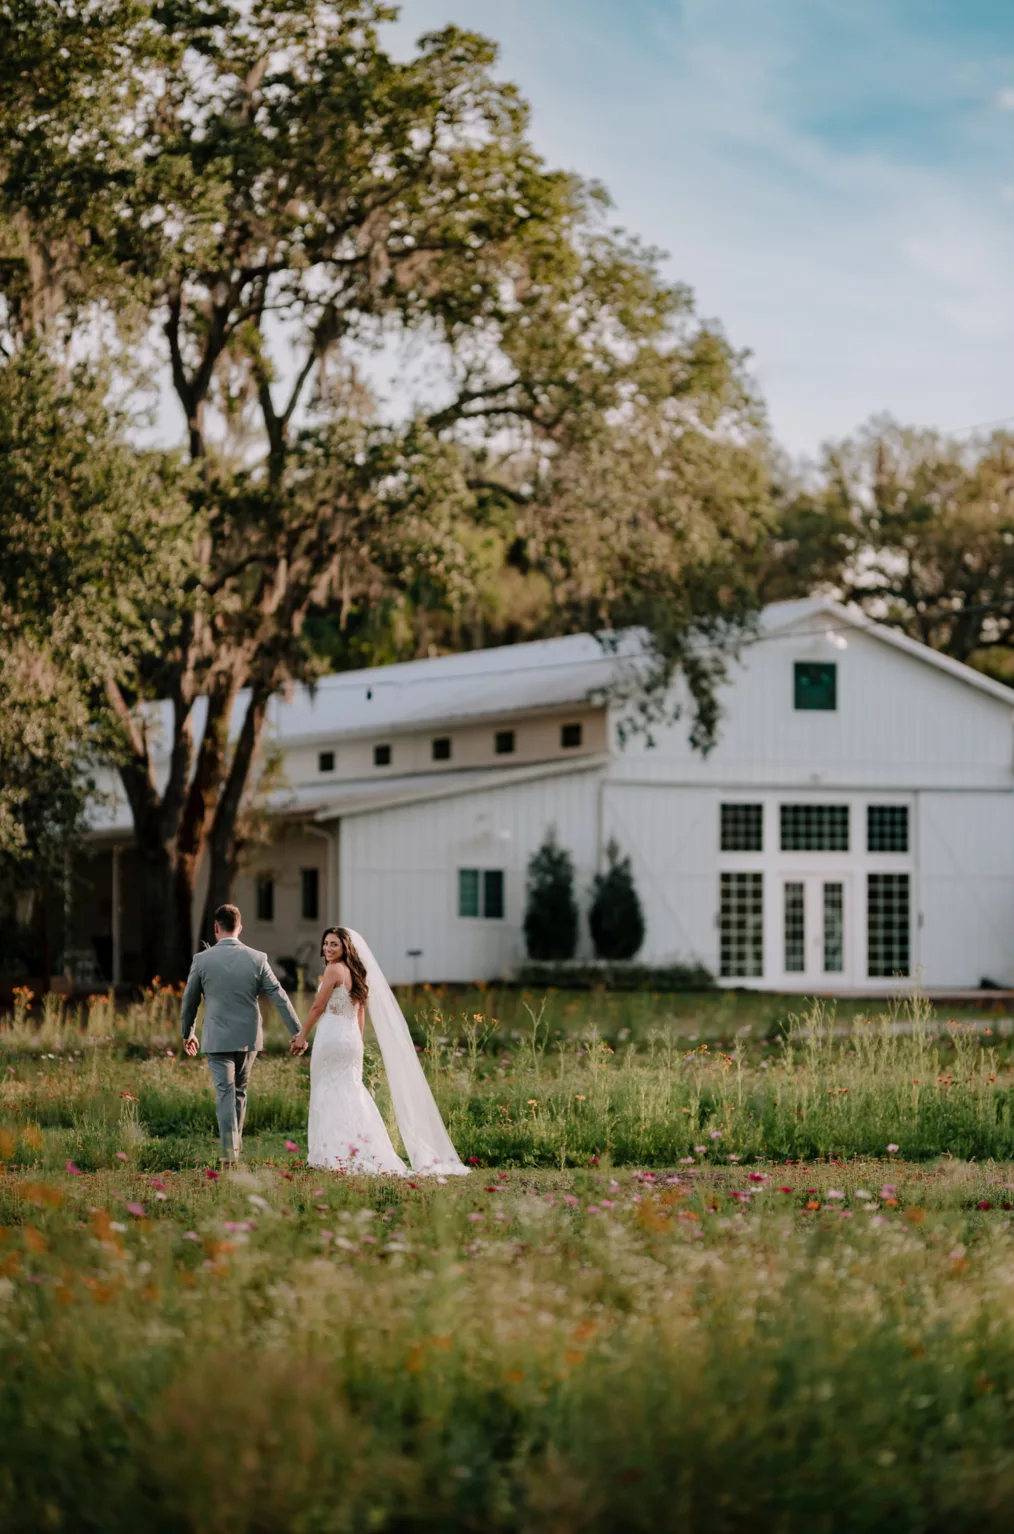 Bride and Groom Walking Through Wildflower Field Wedding Portrait | Rustic Barn Wedding Reception Inspiration | Florida Event Venue Ever After Farms Flower Wedding Barn | Tampa Wedding Photographer and Videographer Sabrina Autumn Photography